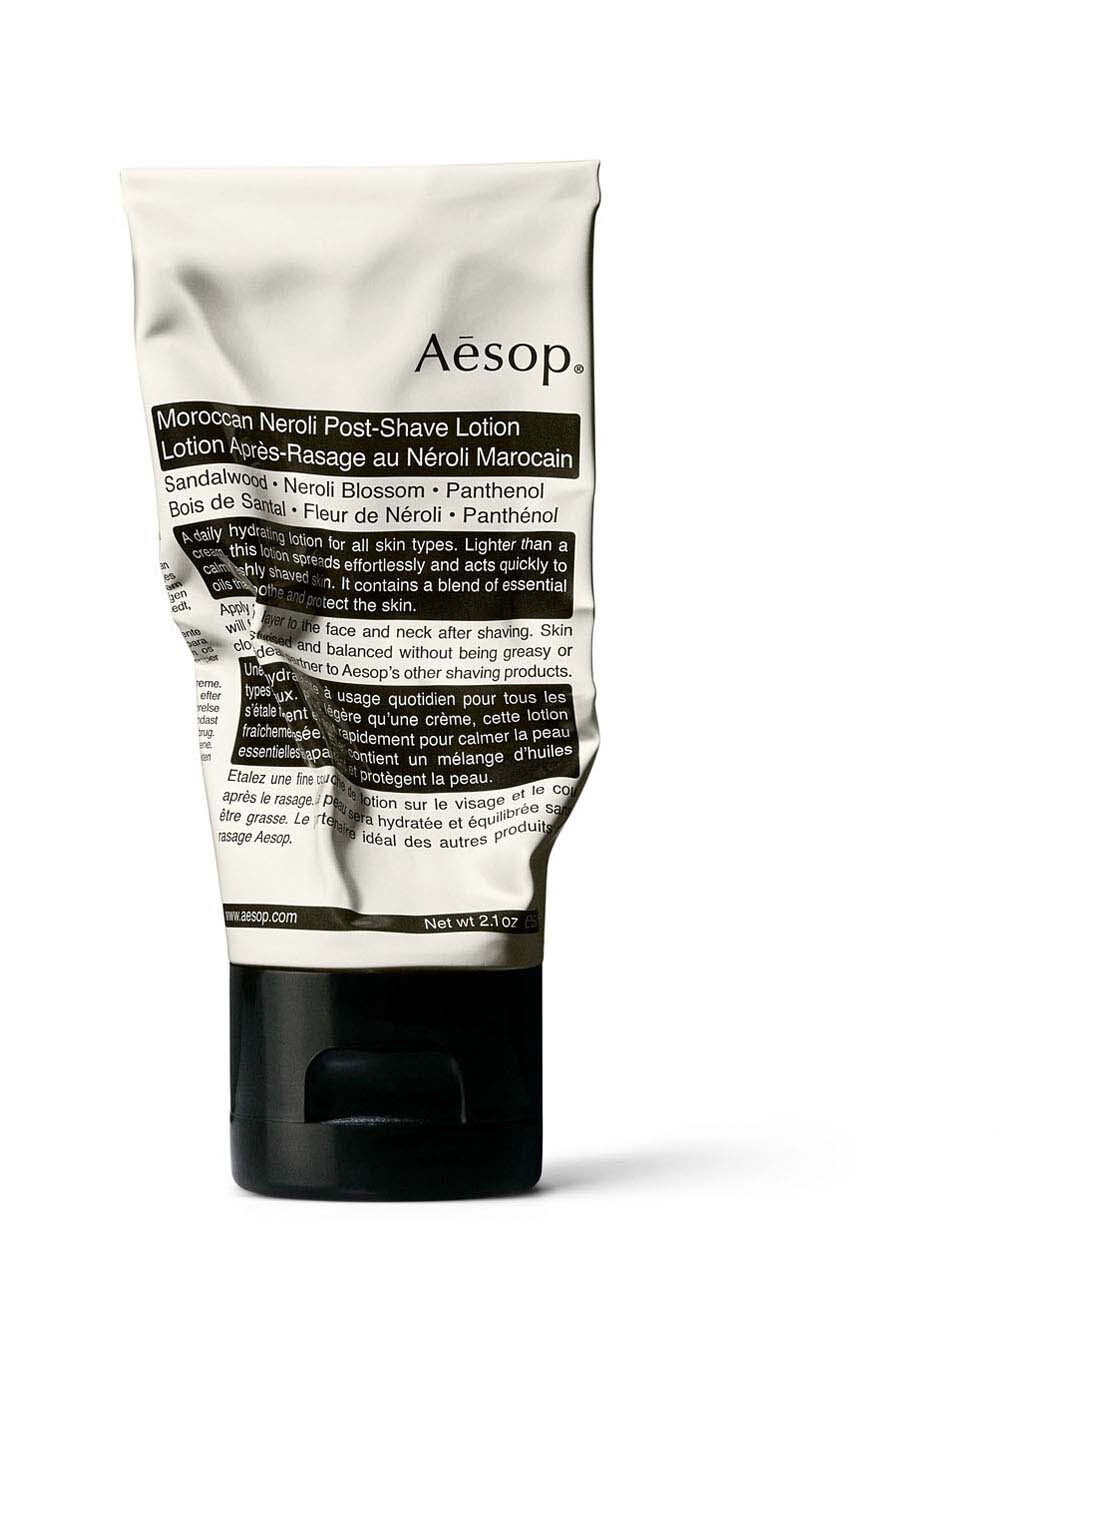 Aesop Moroccan Neroli Post-Shave Lotion - aftershave lotion